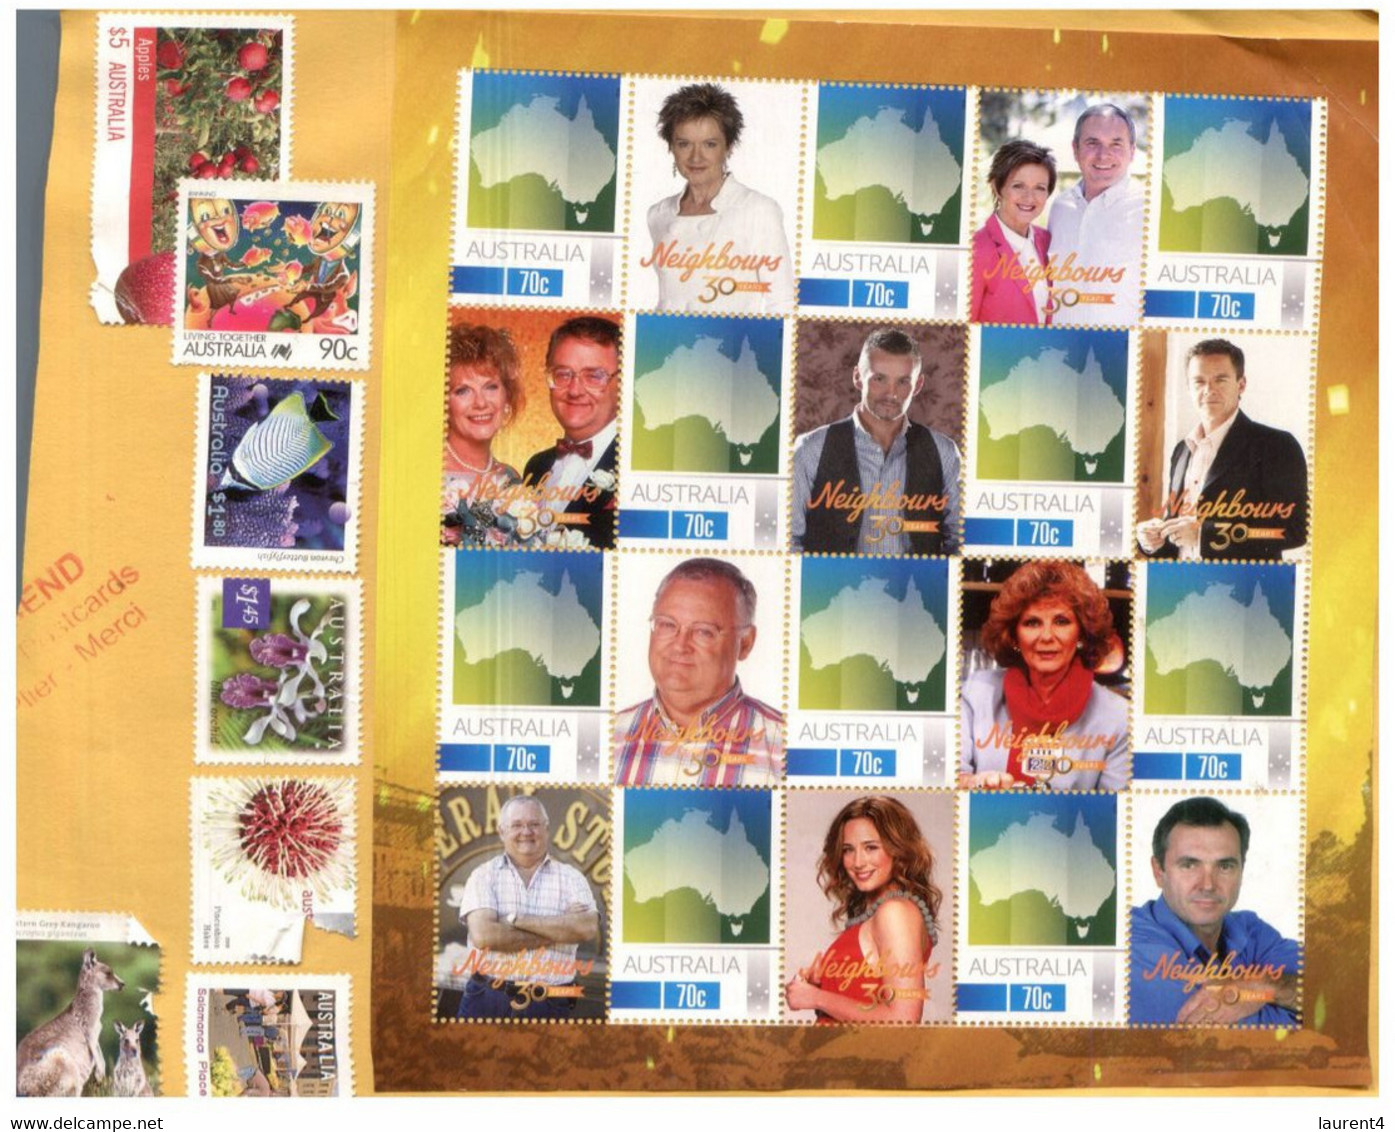 (BB 24 Large) On Paper - Personalised Stamps - Neighbours TV Show 30th Anniversary Sheet (10 Stamps) - Sheets, Plate Blocks &  Multiples